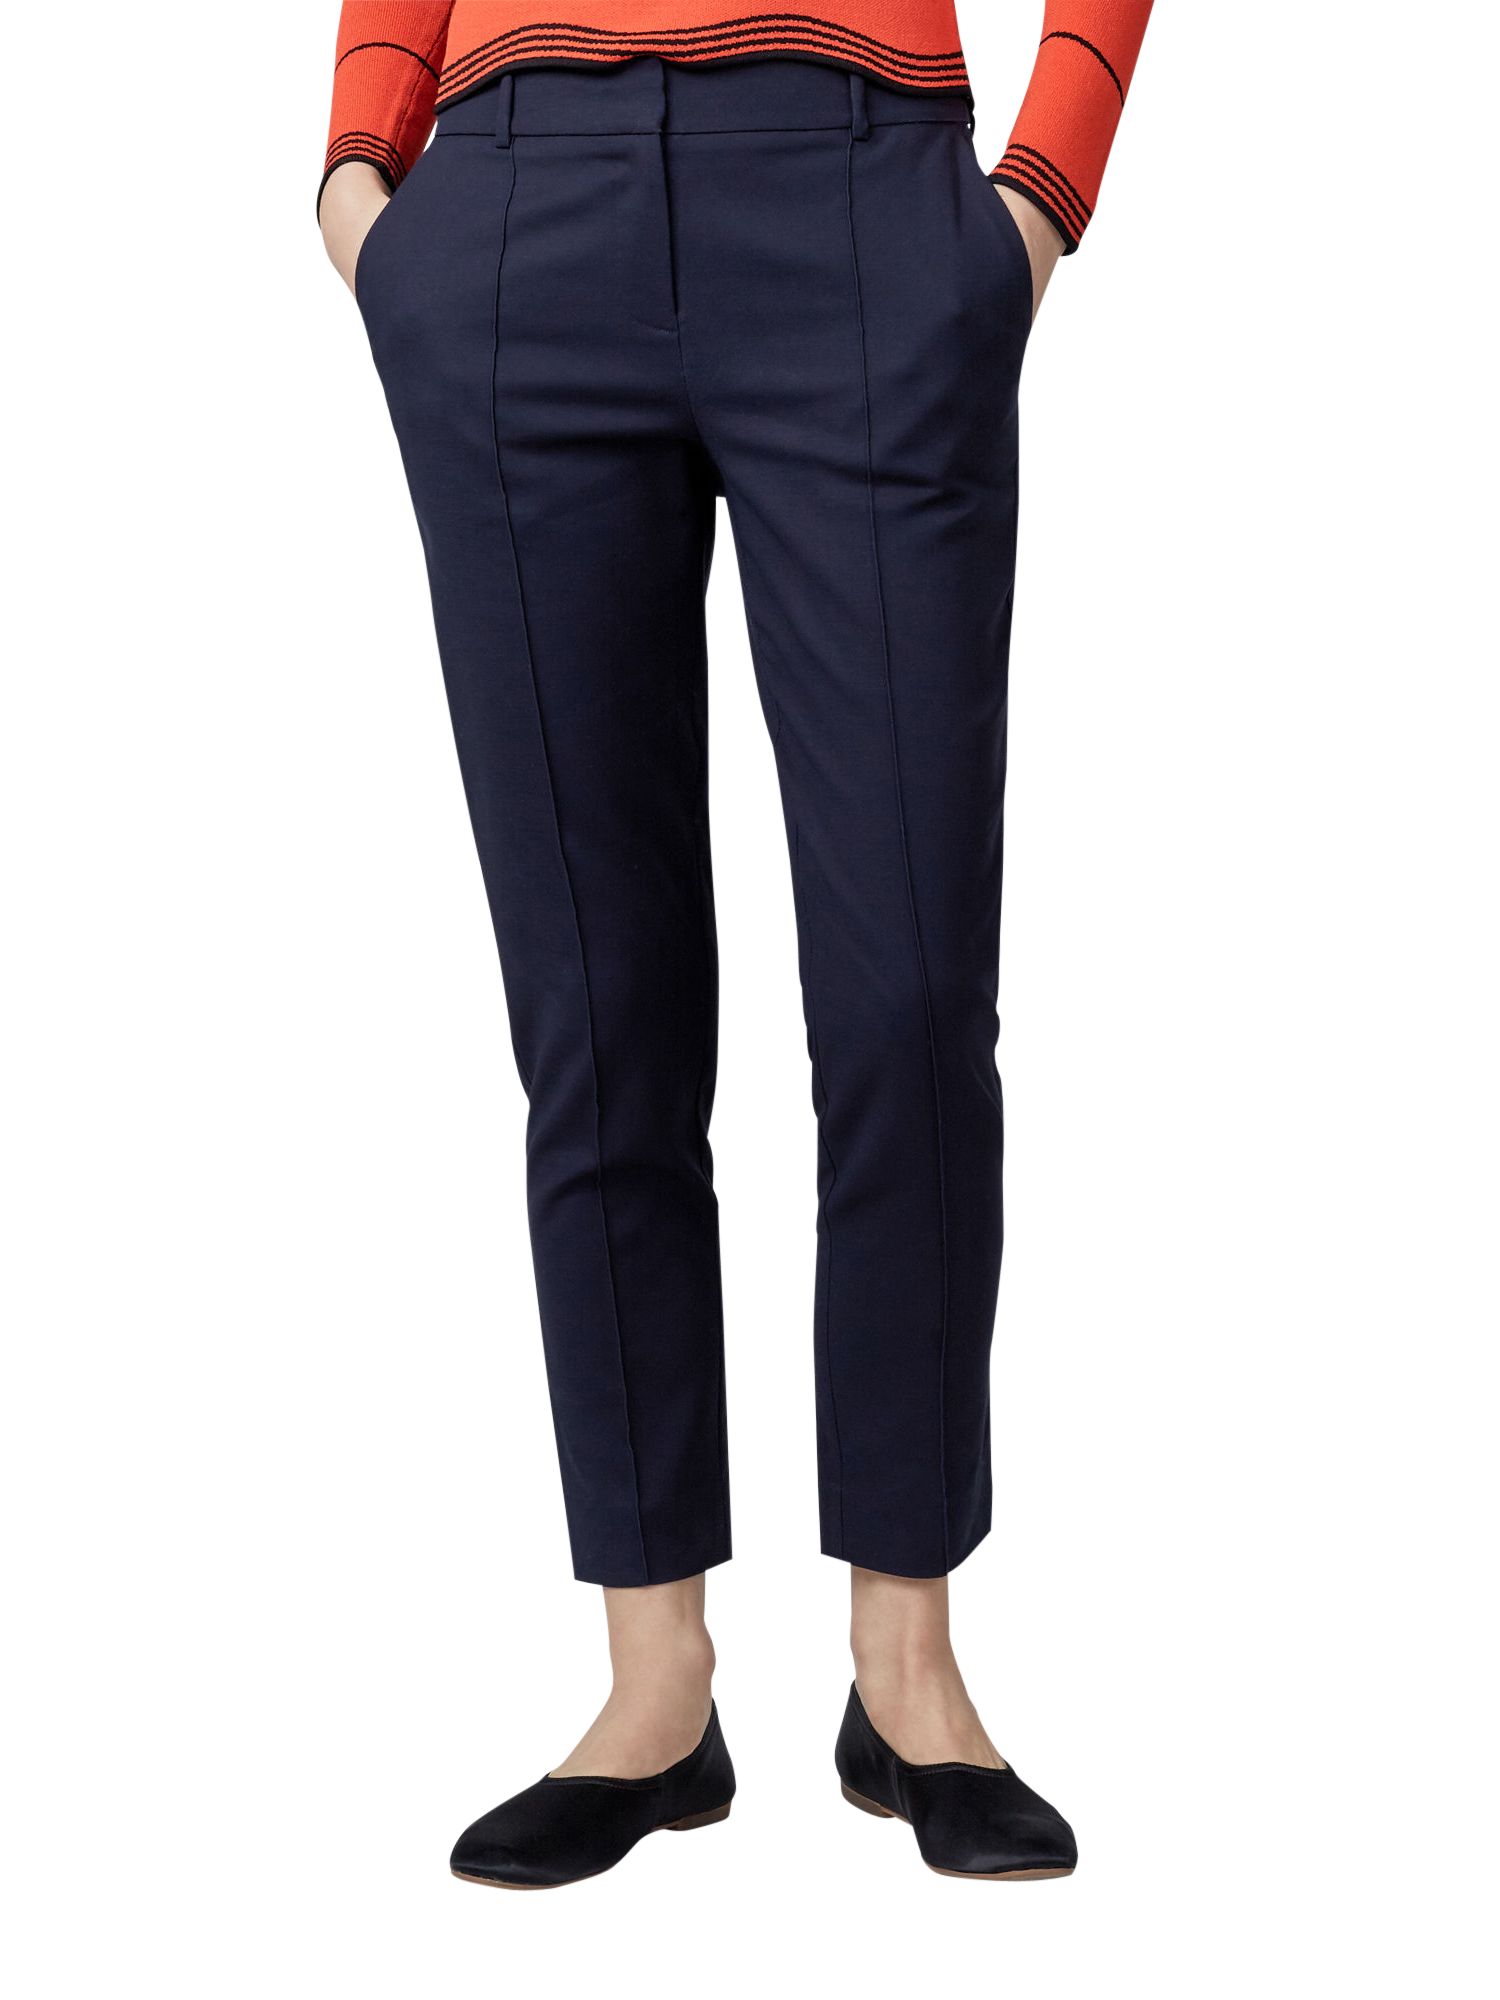 Warehouse Compact Cotton Trousers, Navy, 6